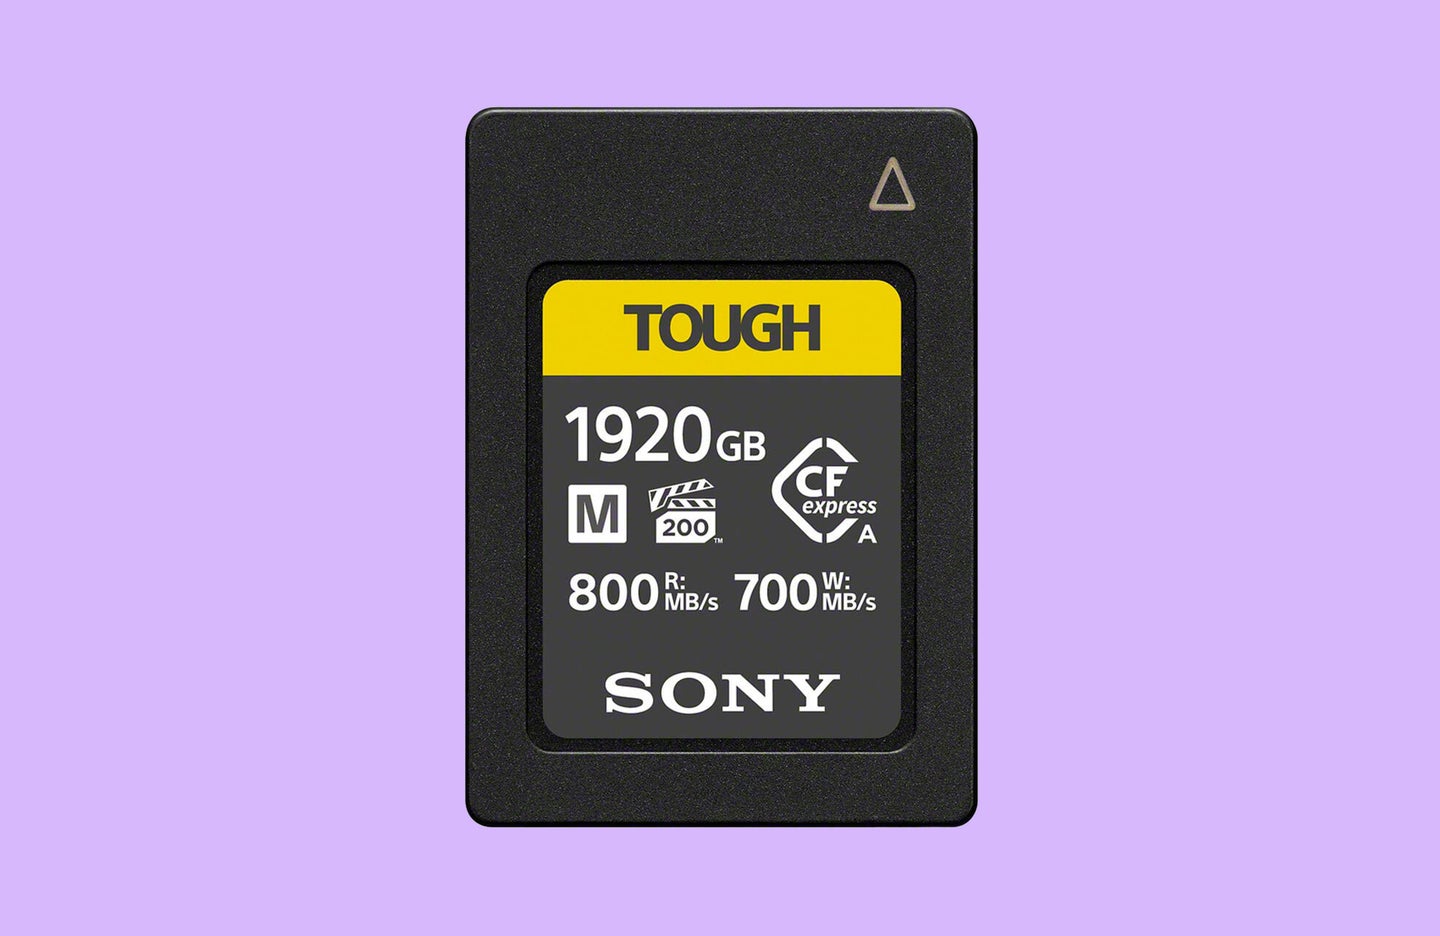 Sony CEA-M Series TOUGH 1920GB CFexpress Type-A Memory Card on a purple background